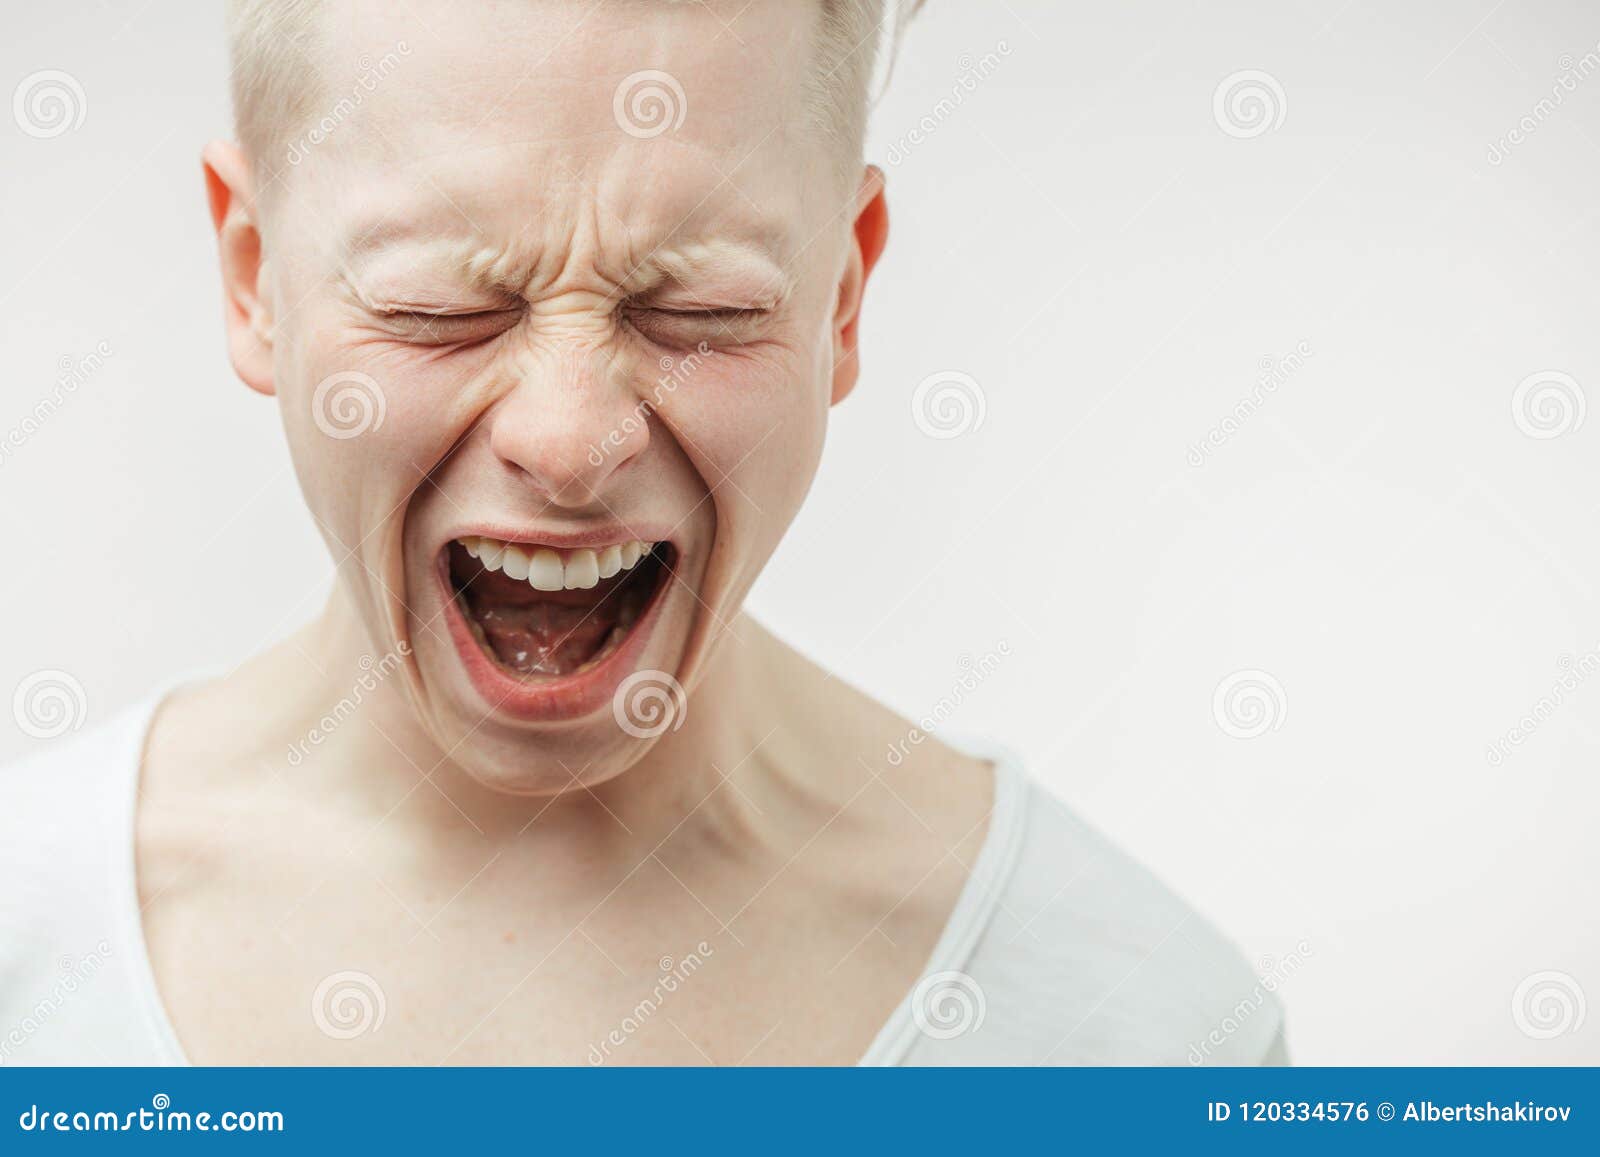 Closeup of Upset Overwhelmed Young Man Screaming from Despair and ...